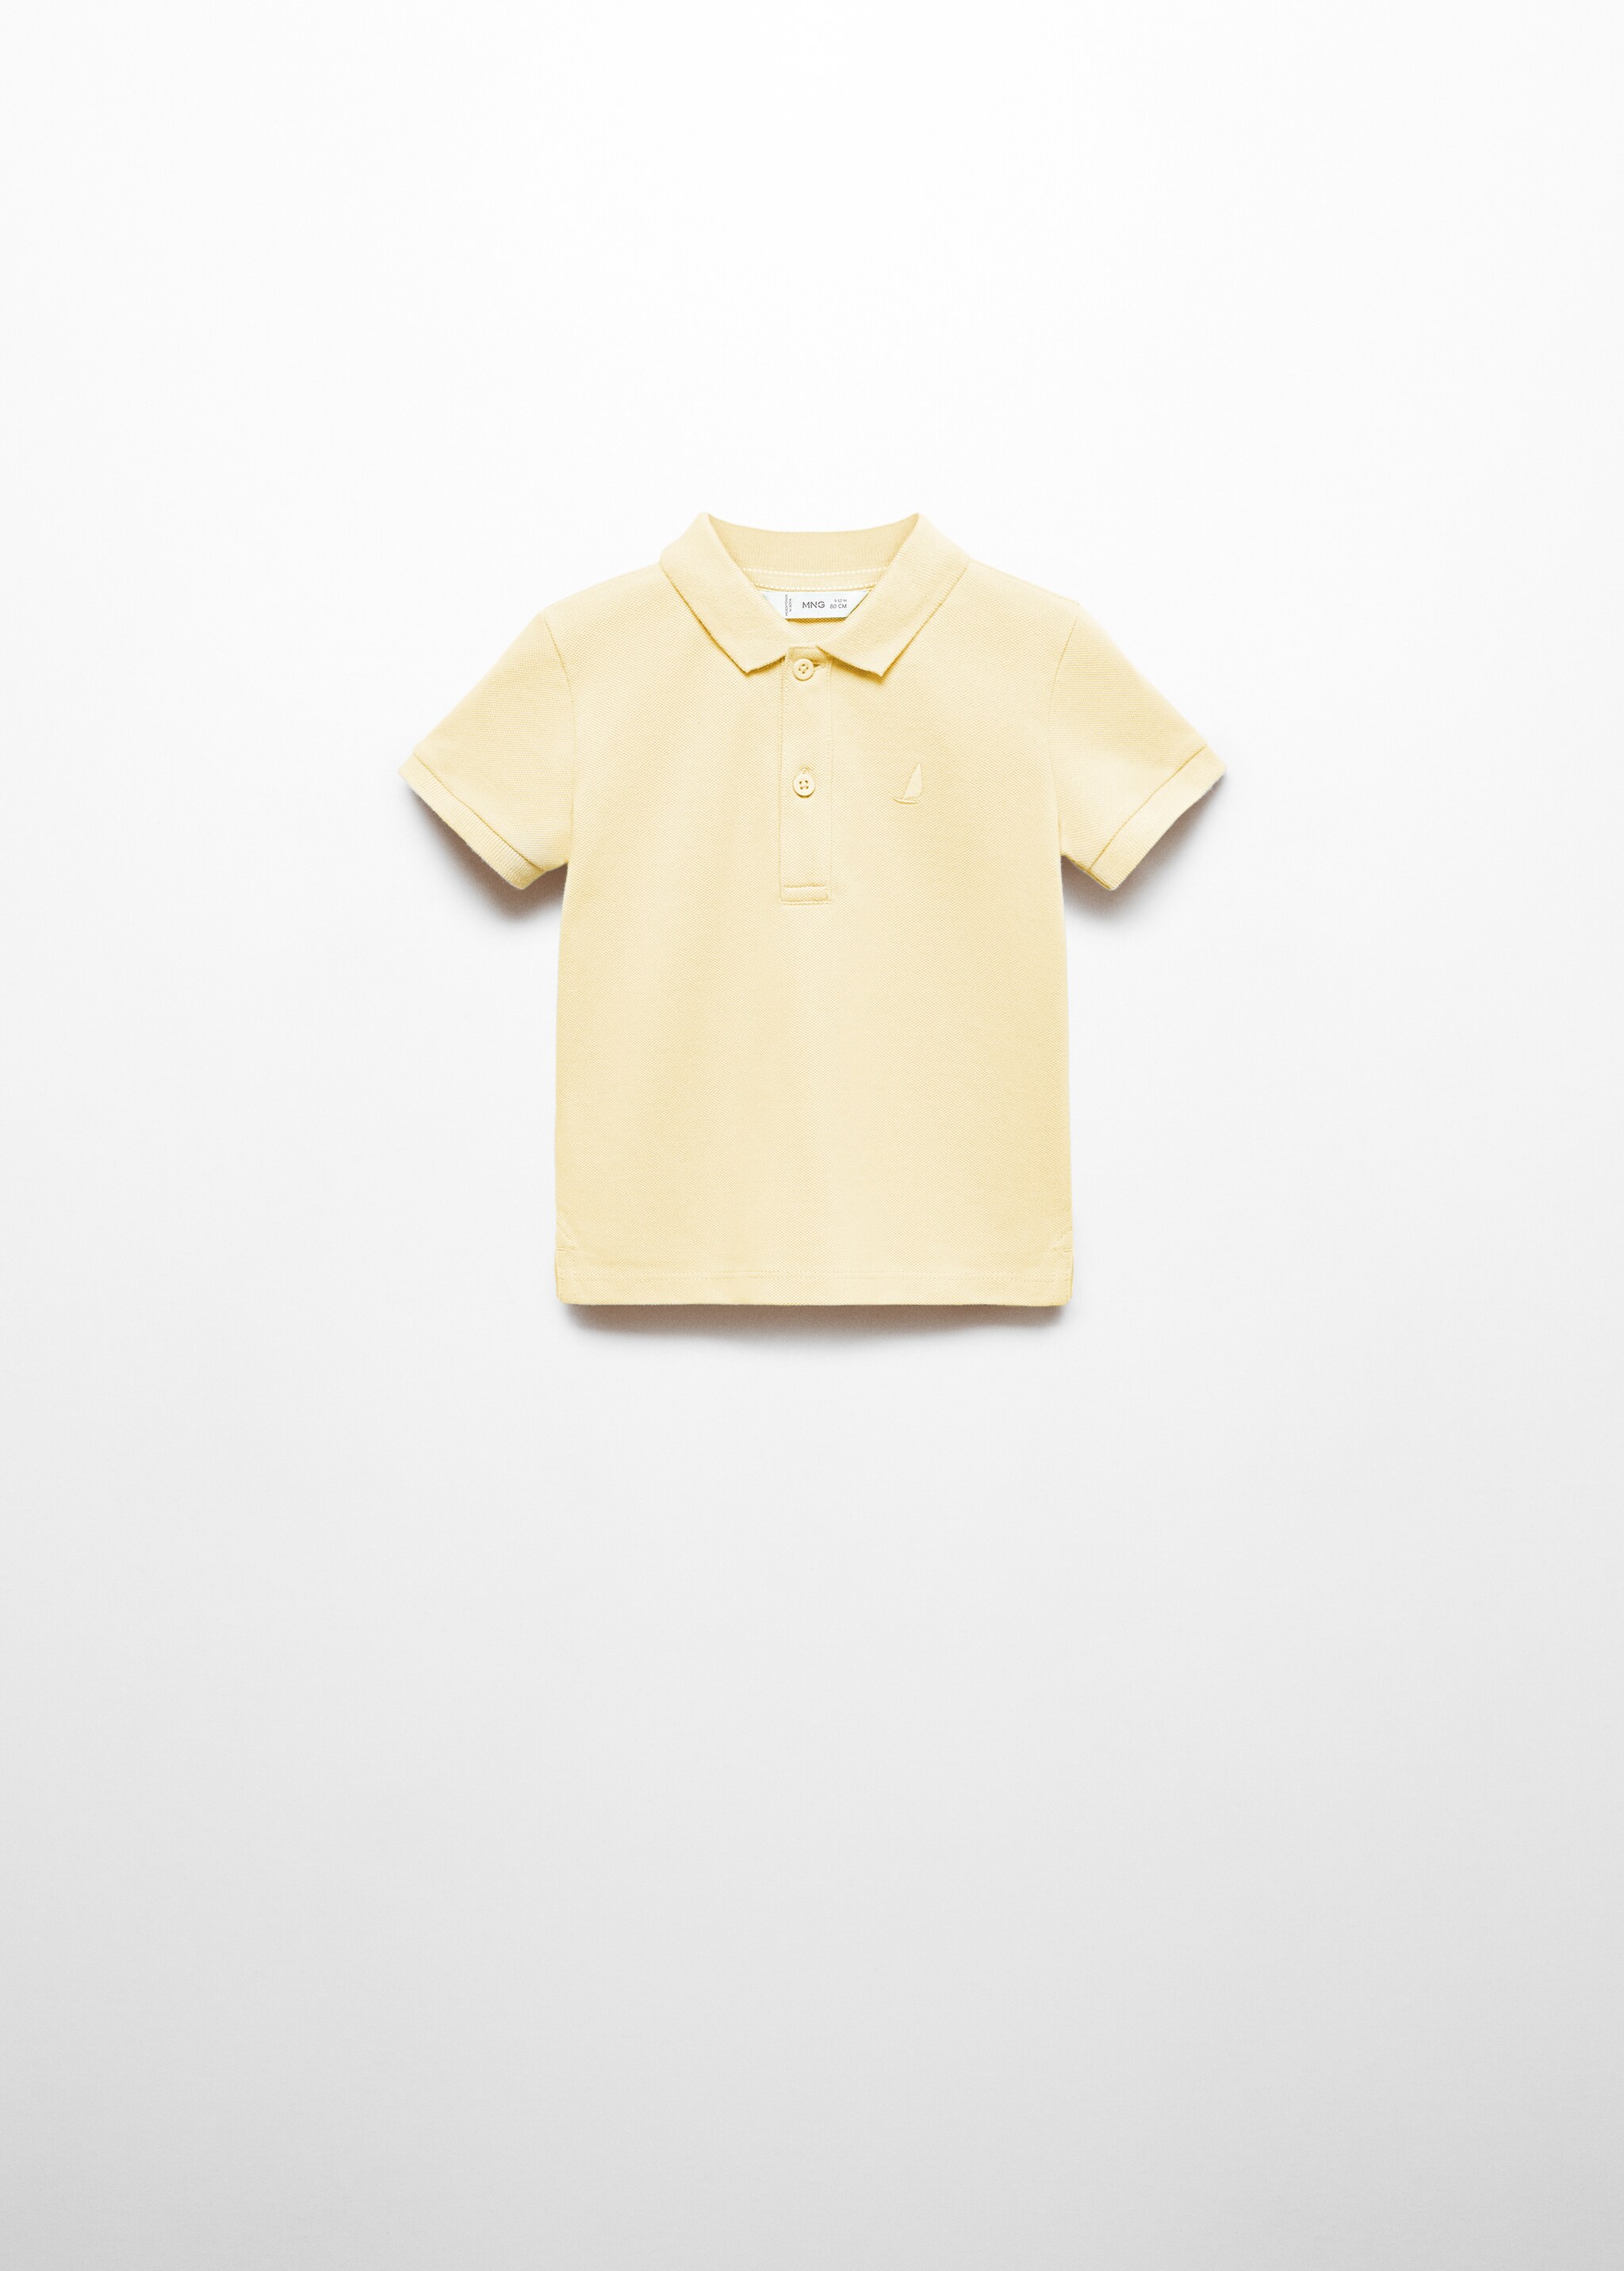 Textured cotton polo shirt - Article without model